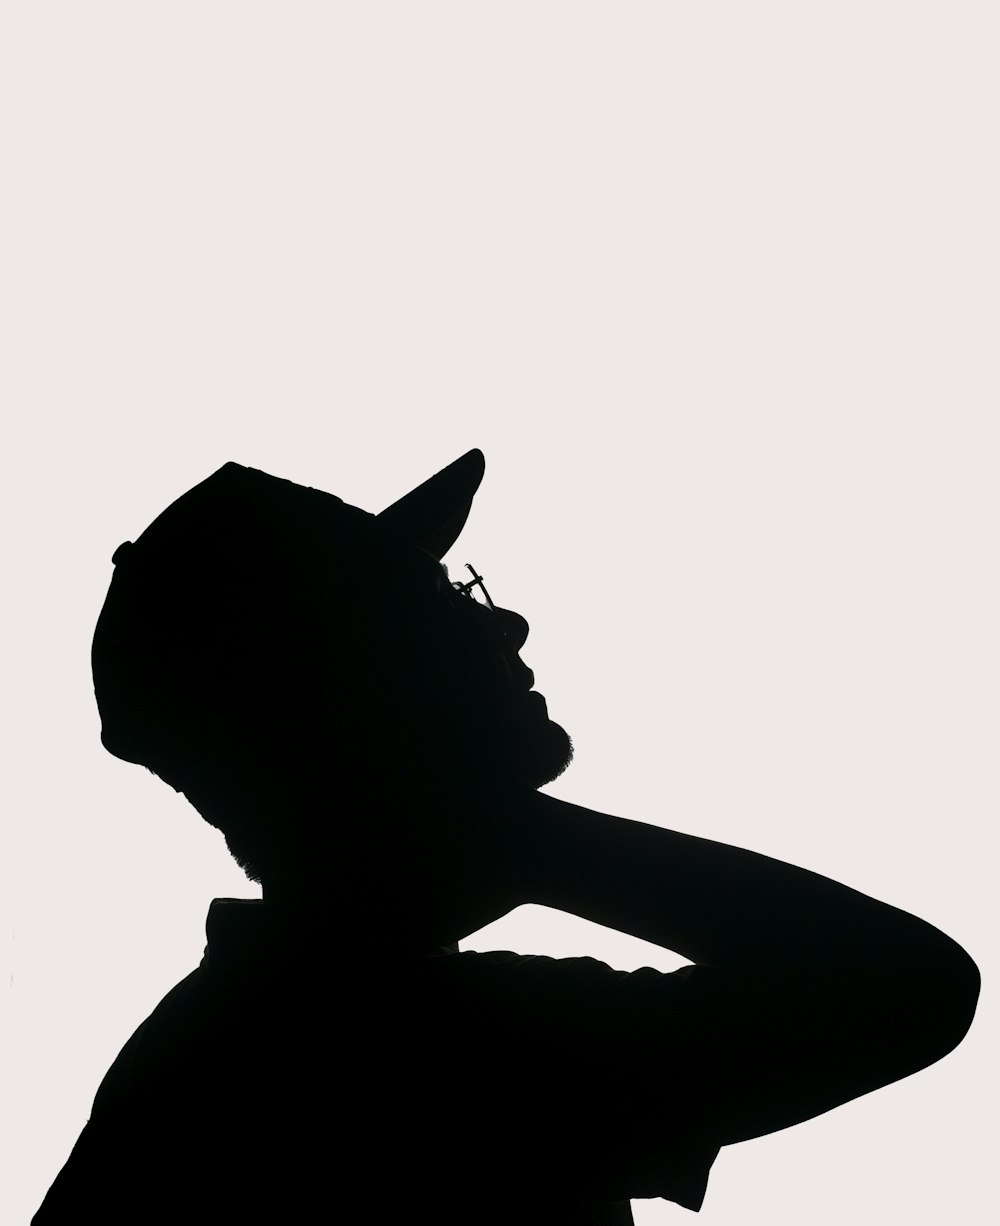 a silhouette of a person wearing a hat